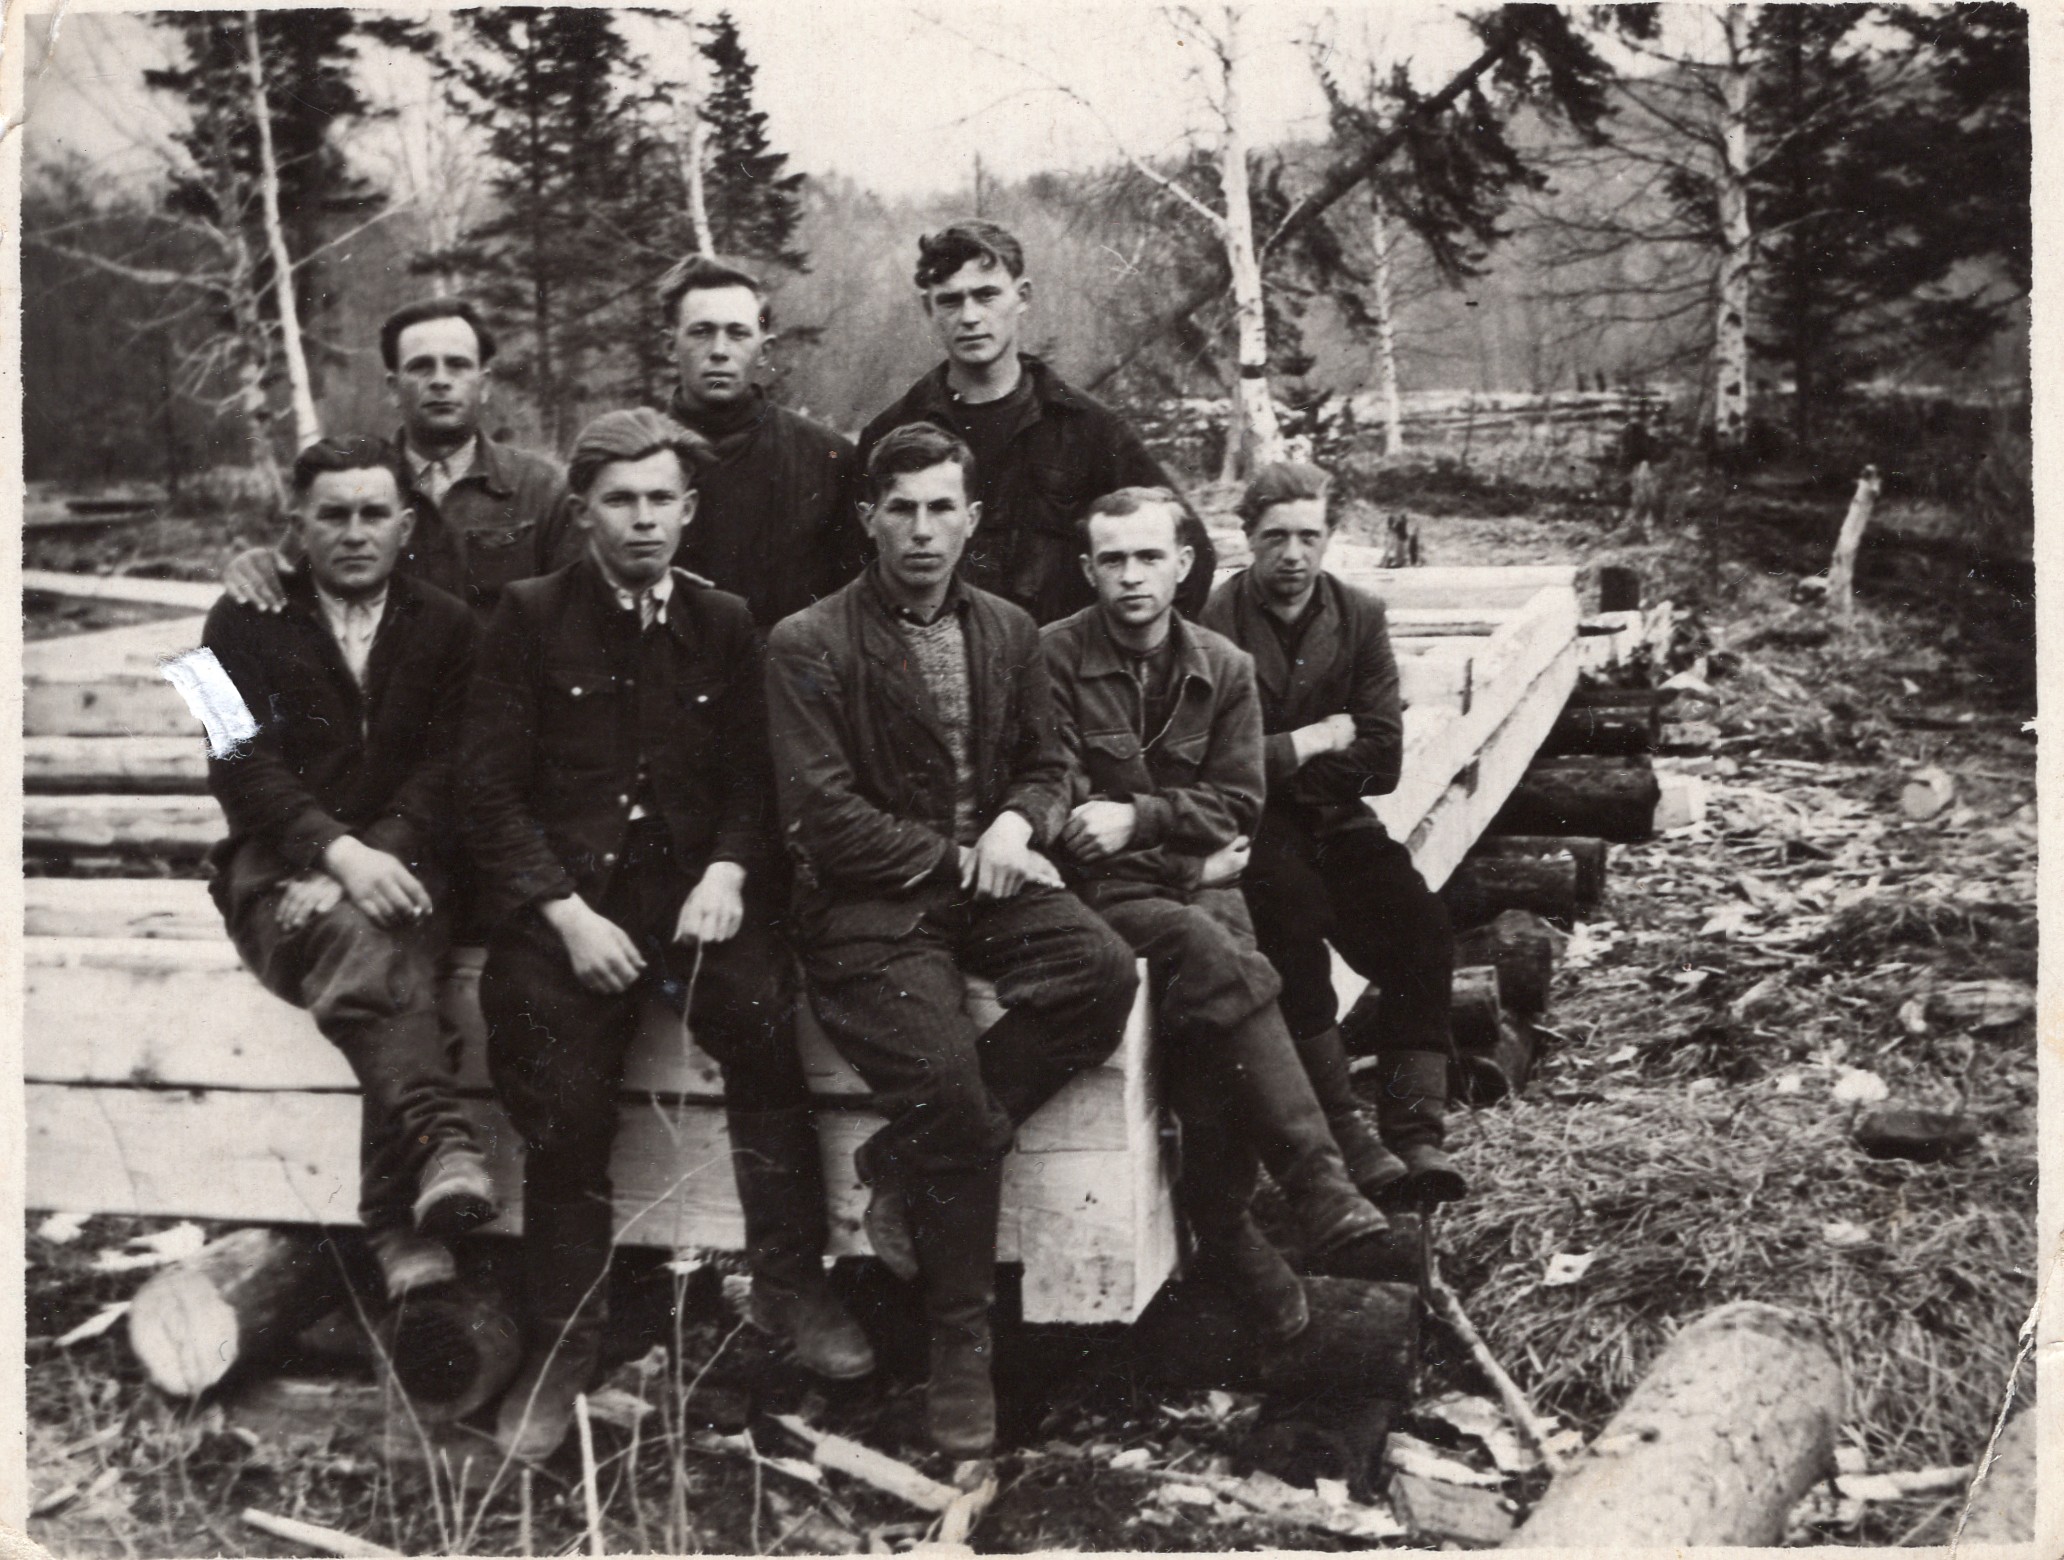 Maksymovych (in the middle) with his comrades, vicinity of Khabarovsk, 1951